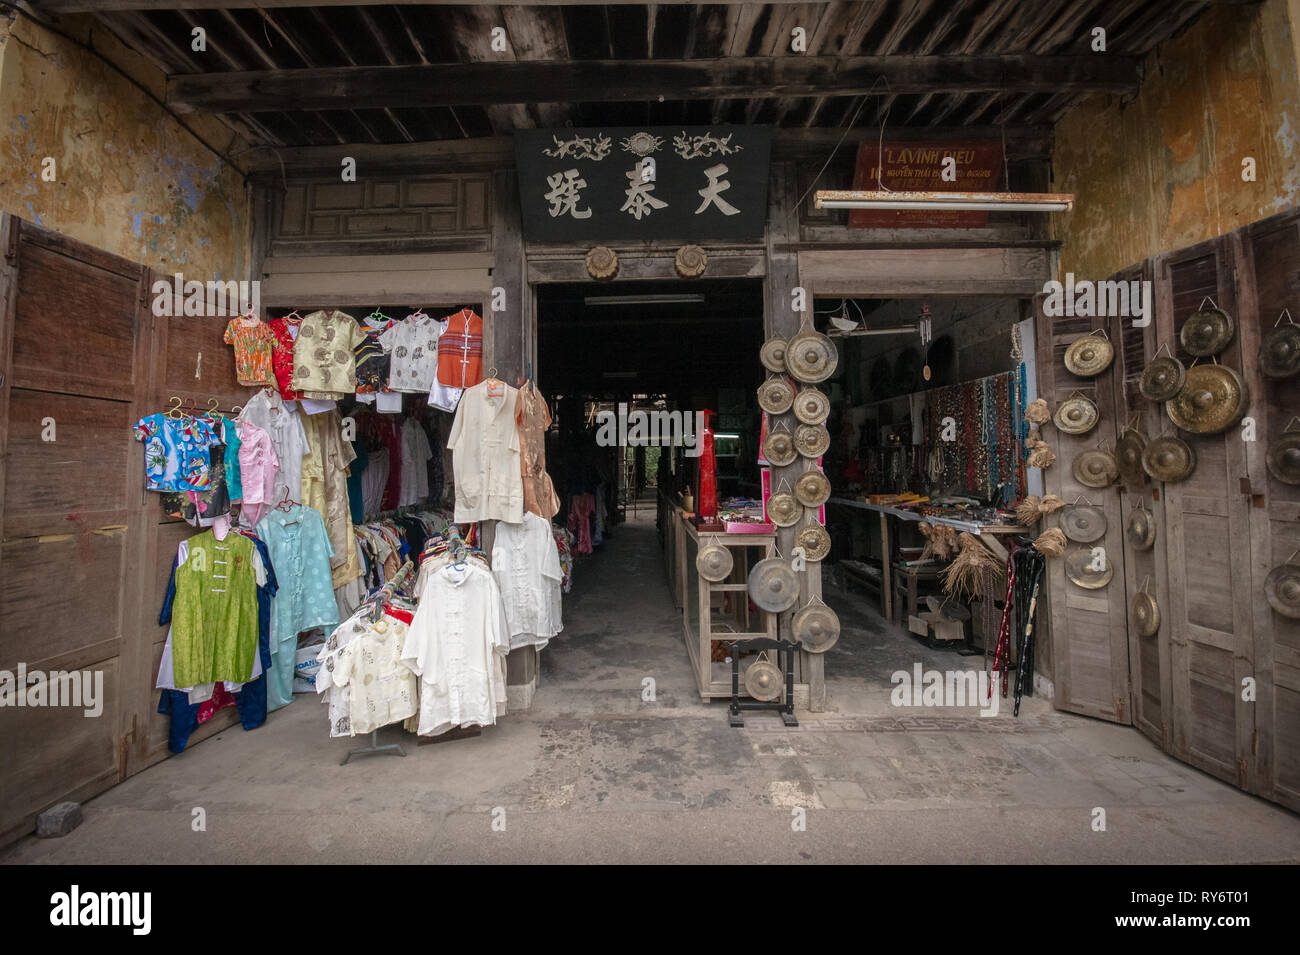 Traditional Hoi An Tailor Shop With Gongs and Rustic Decor - Vietnam Stock Photo